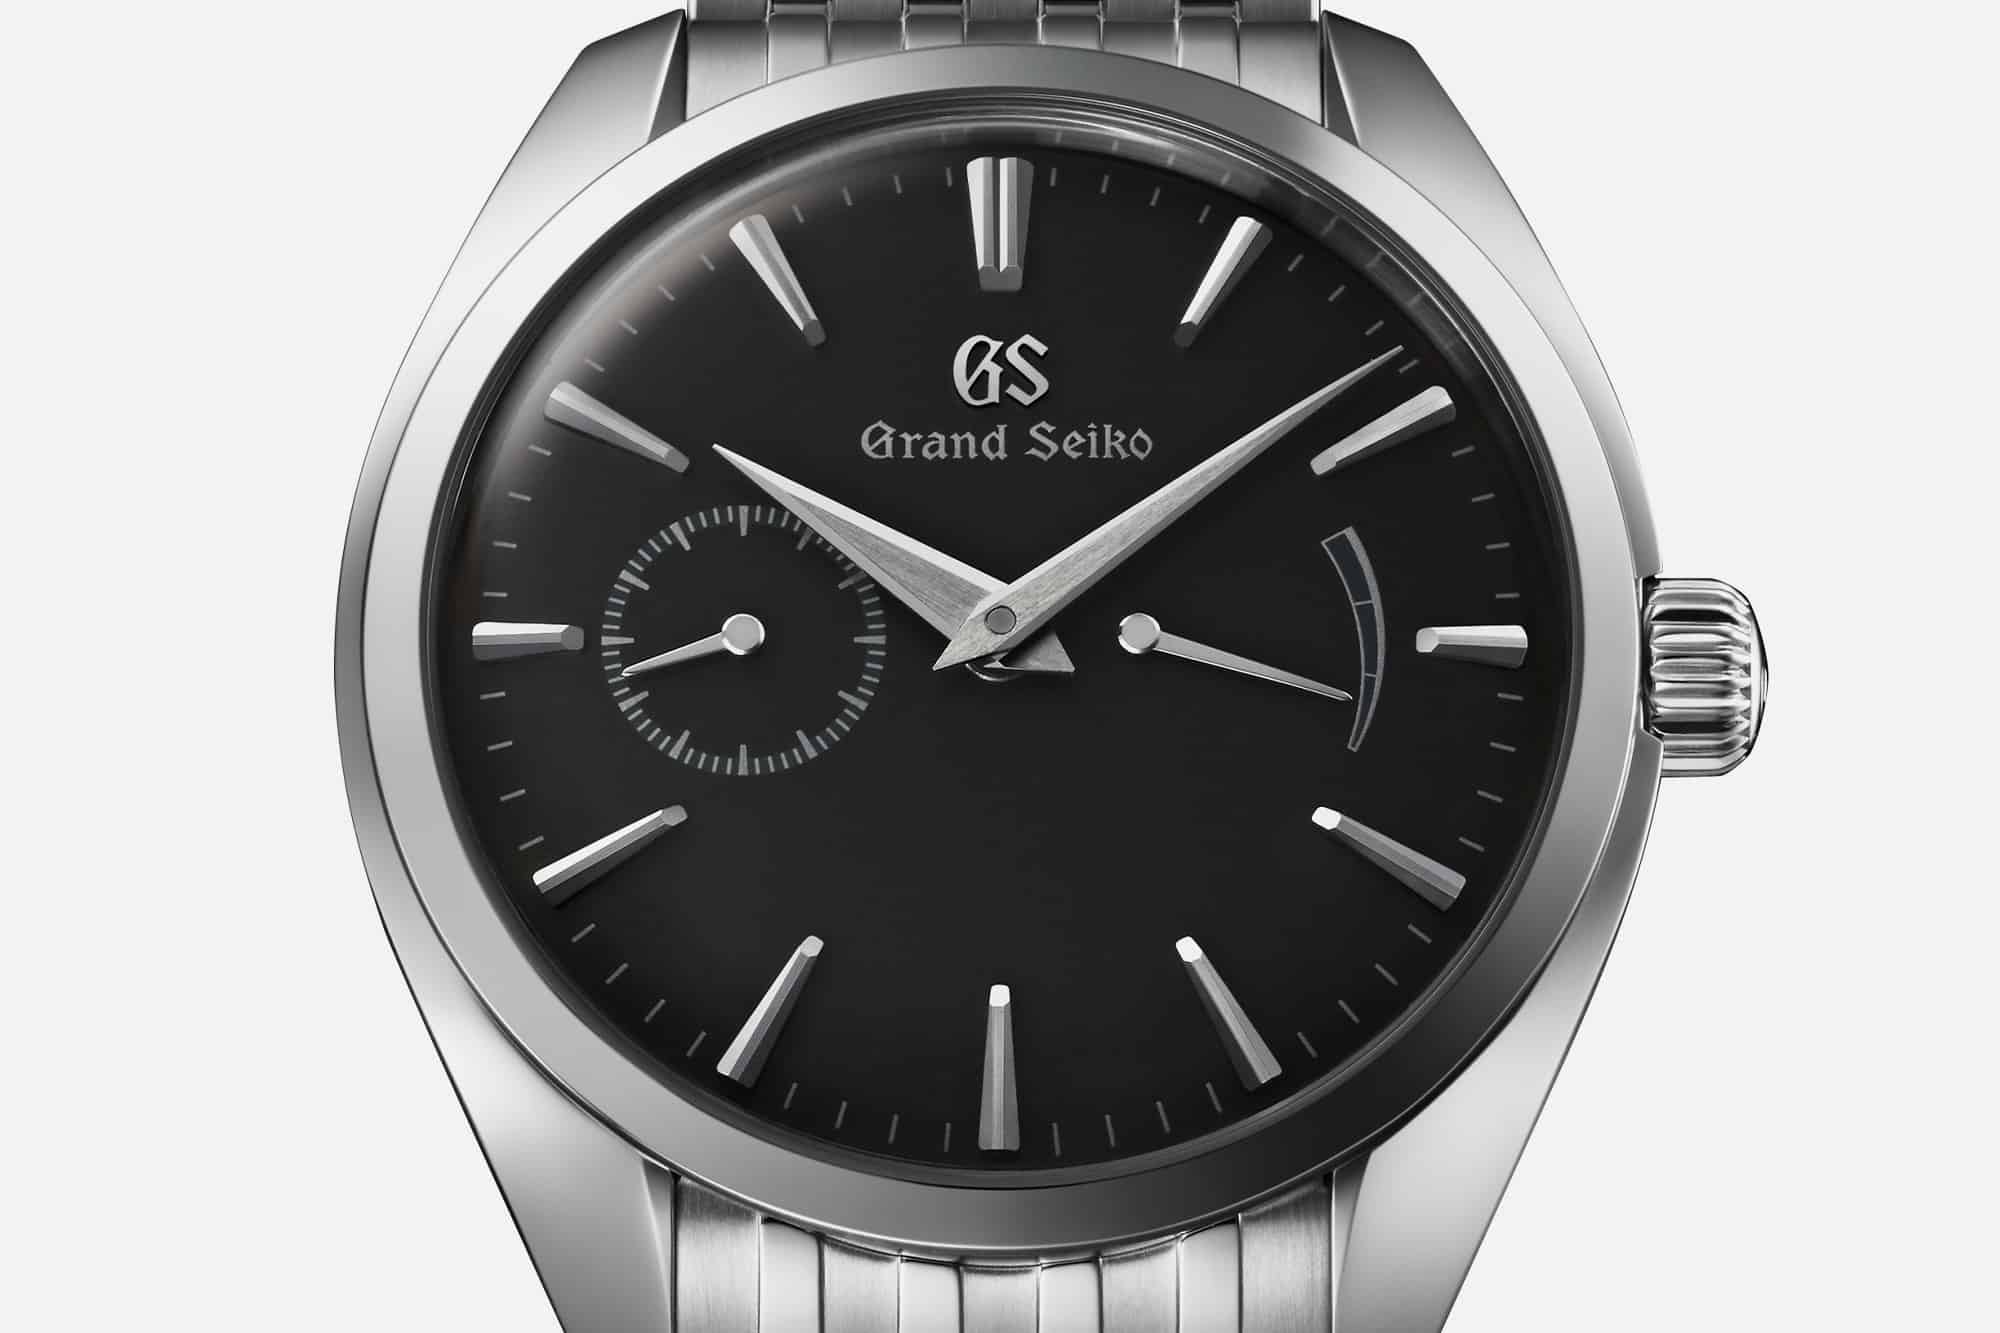 Introducing the Grand Seiko Refs. SBGK007 and SBGK009 - Worn & Wound